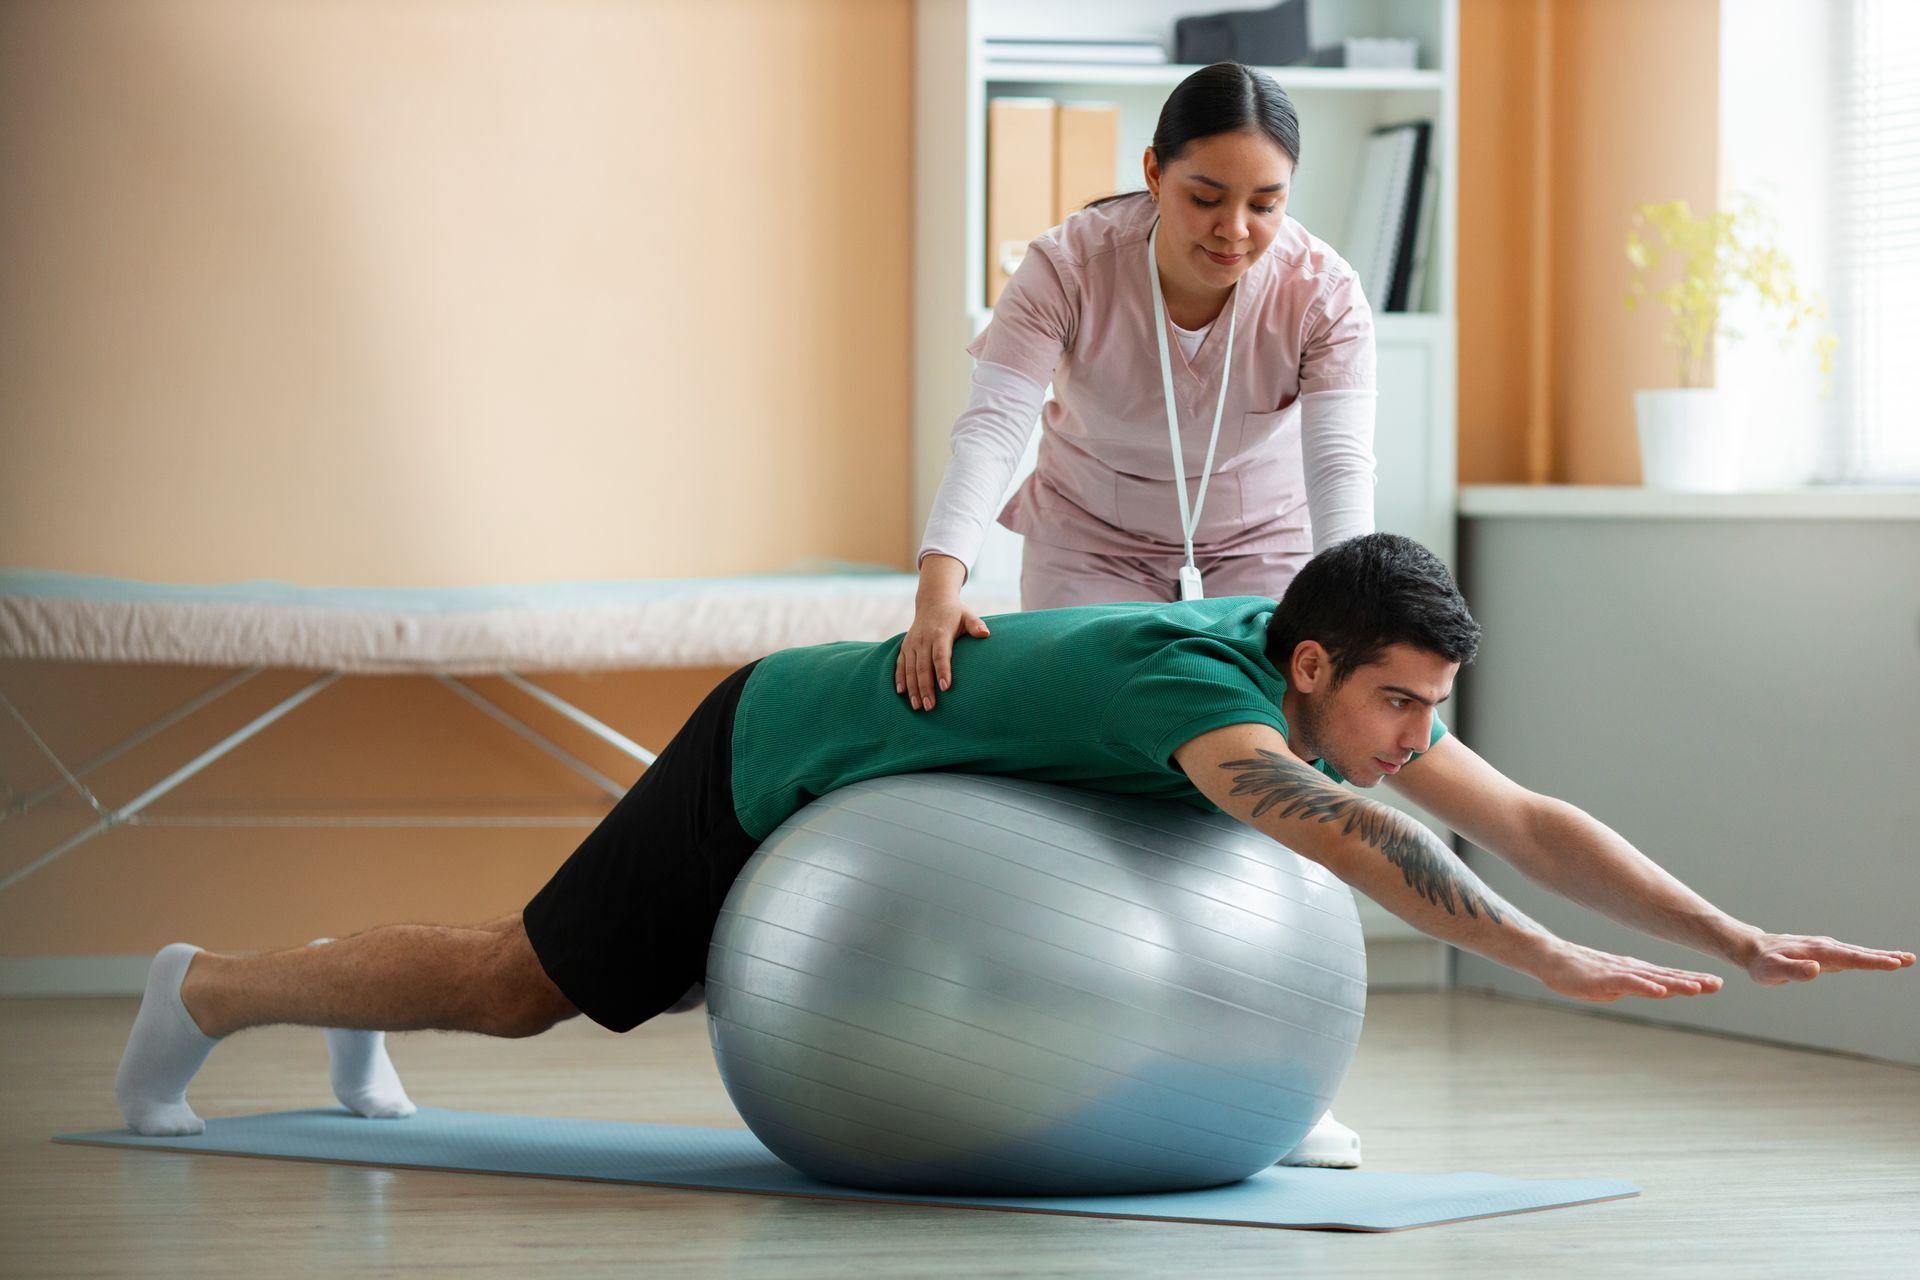 physiotherapy on exercise ball